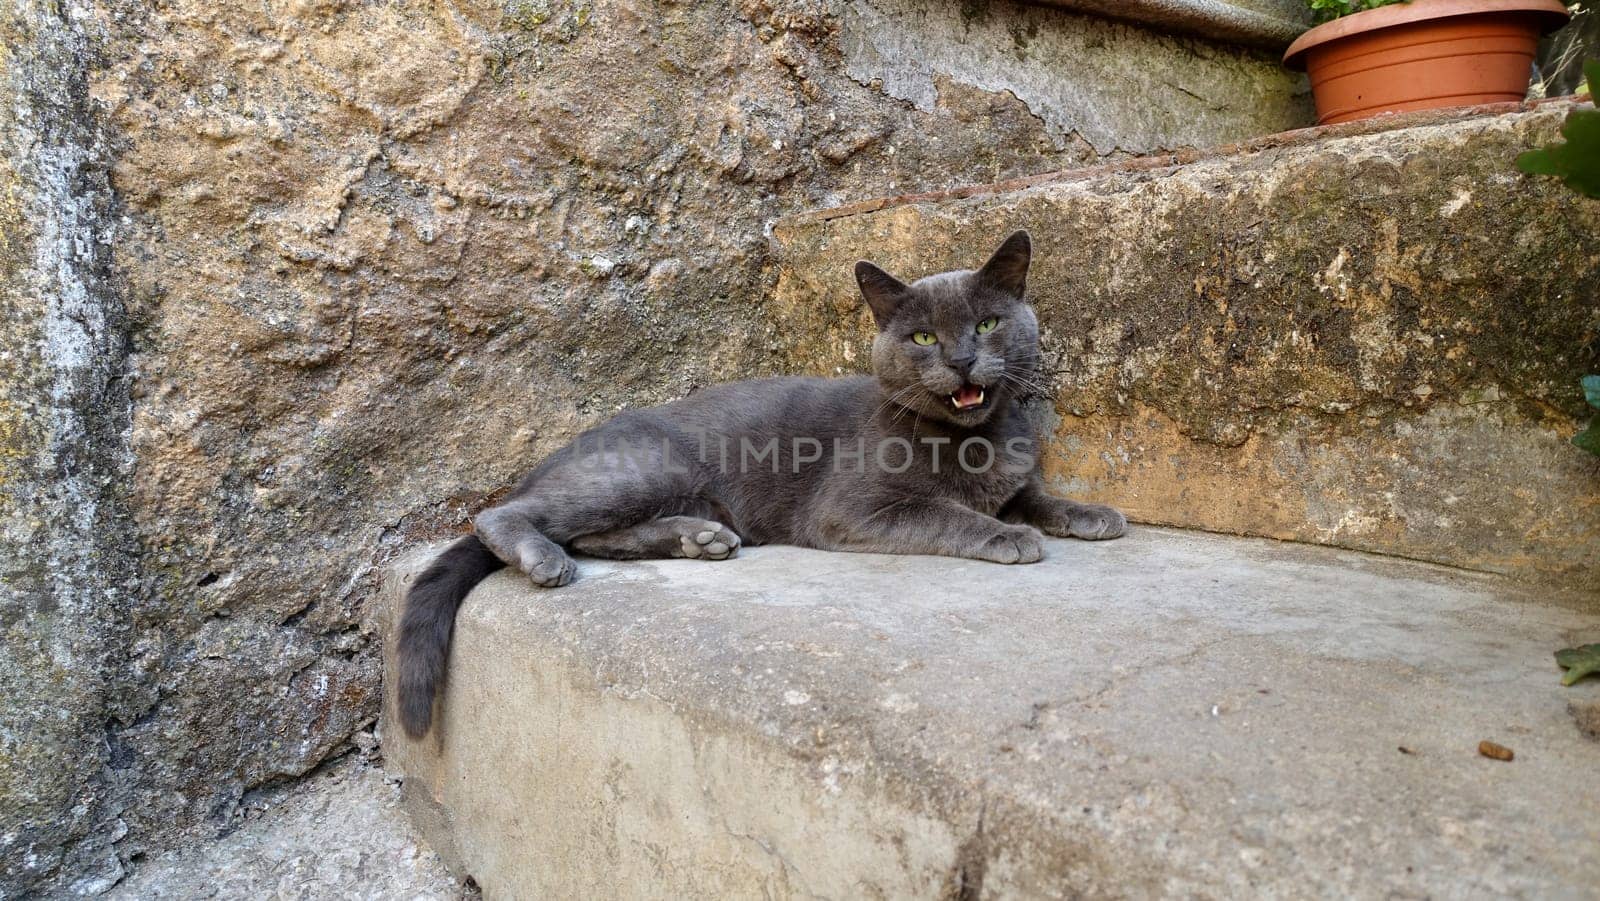 A gray cat resting peacefully on the steps is disturbed by the photographer. by Jamaladeen